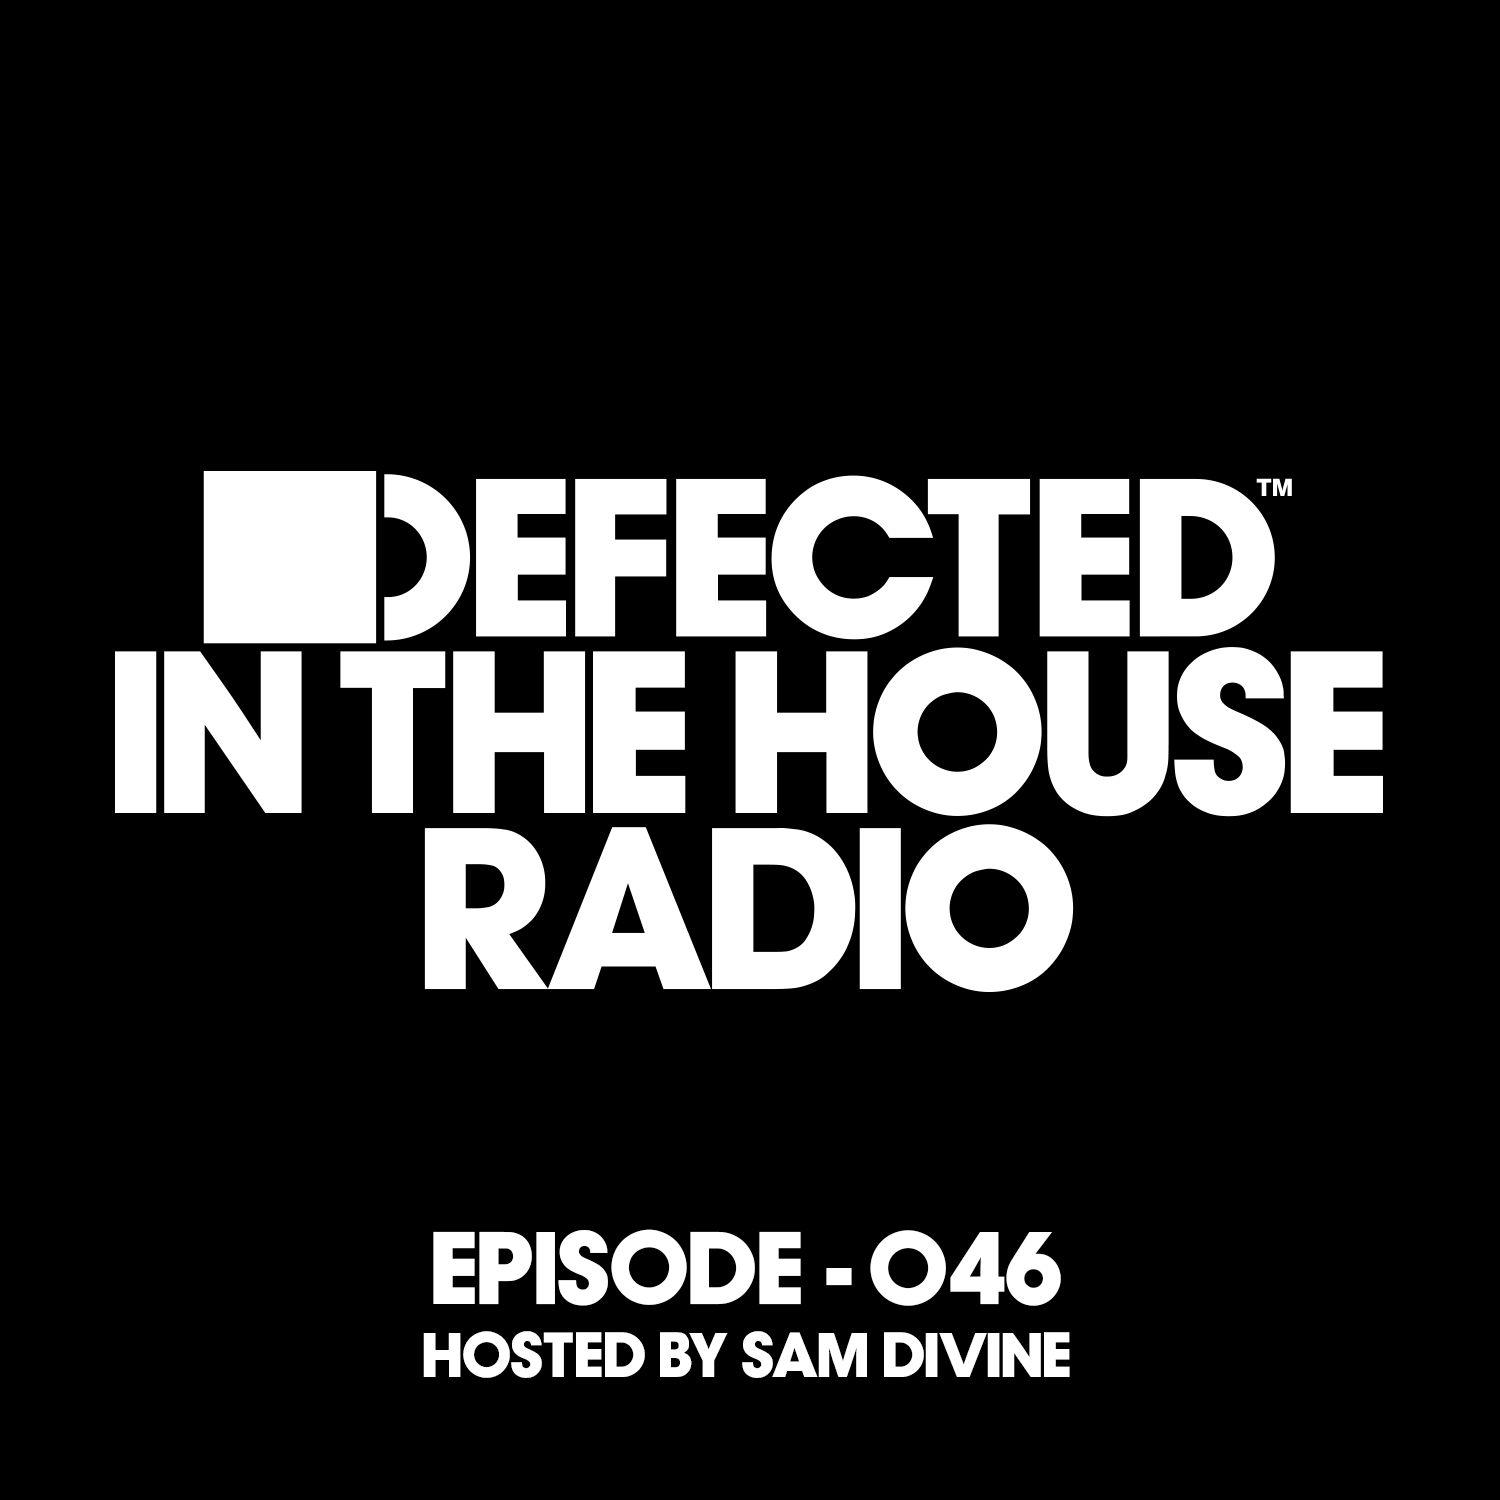 Defected In The House Radio Show Episode 046 (hosted by Sam Divine)